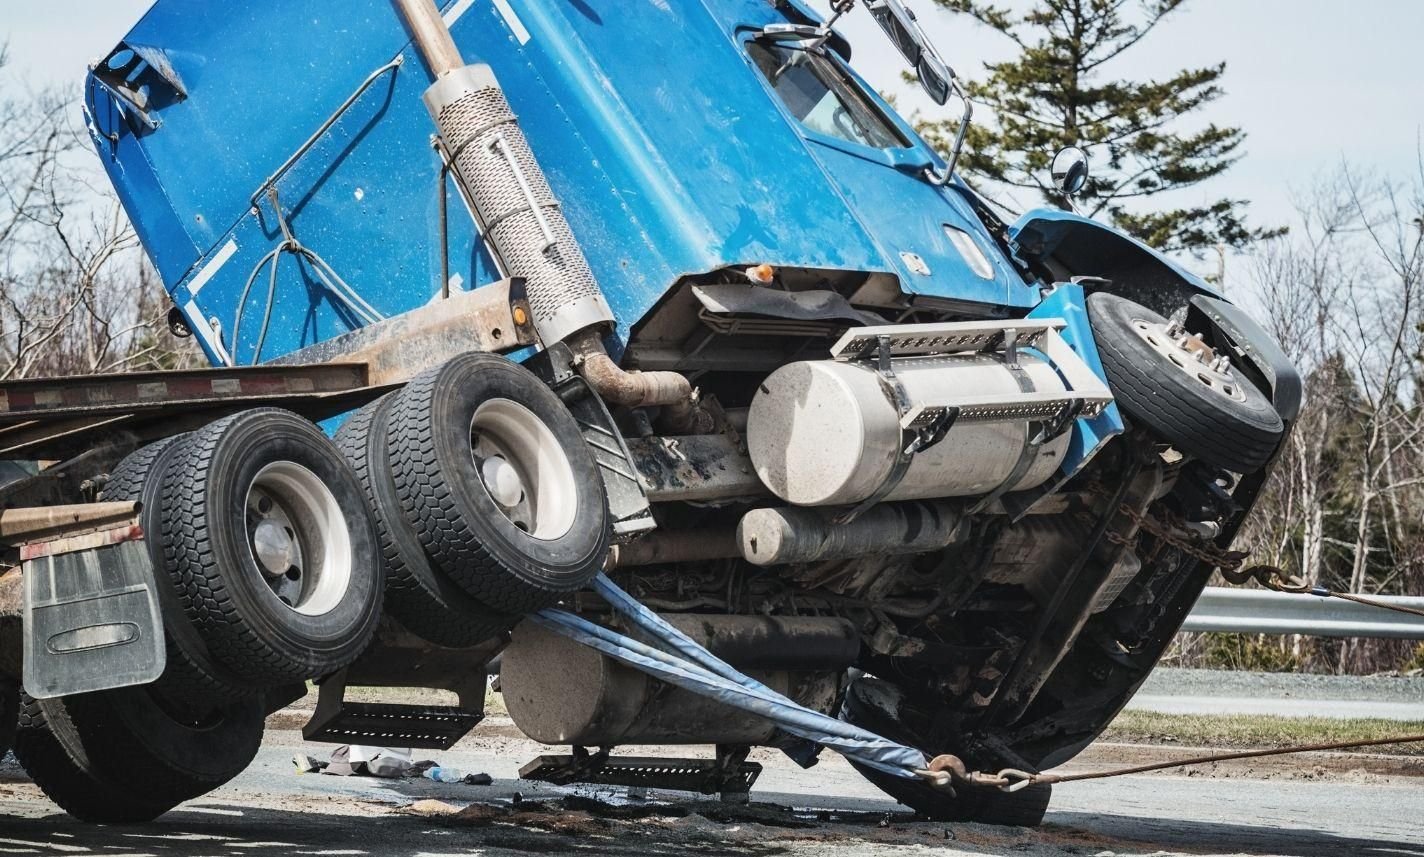 lawrenceville-commercial-truck-accident-injury-lawyer